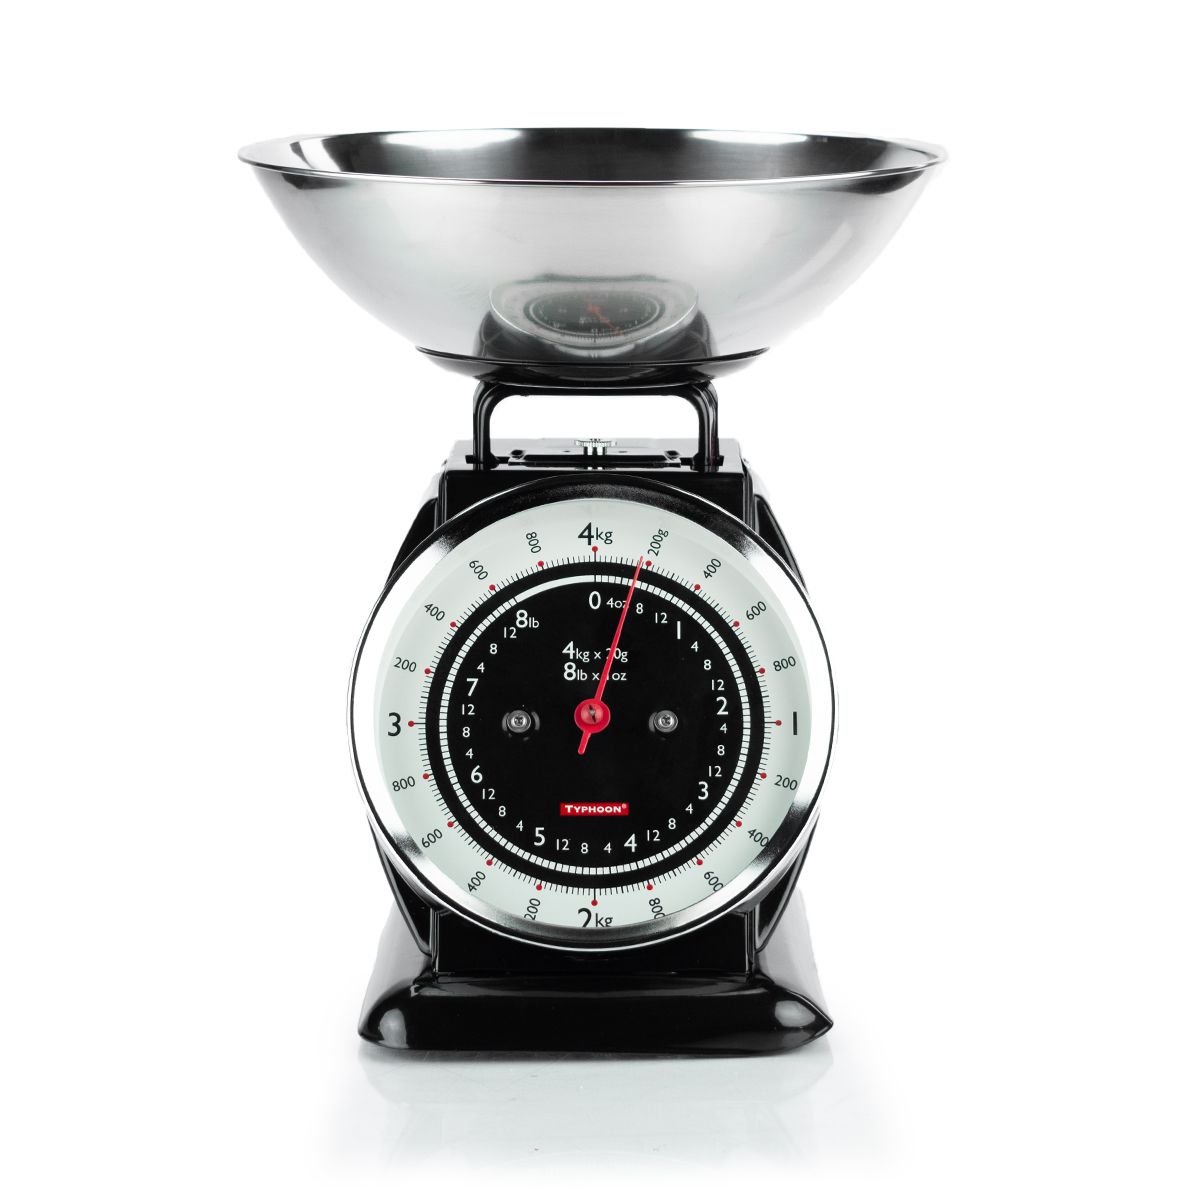 Rondo Bowl Scale (Model R115 in Stainless Steel) from Escali